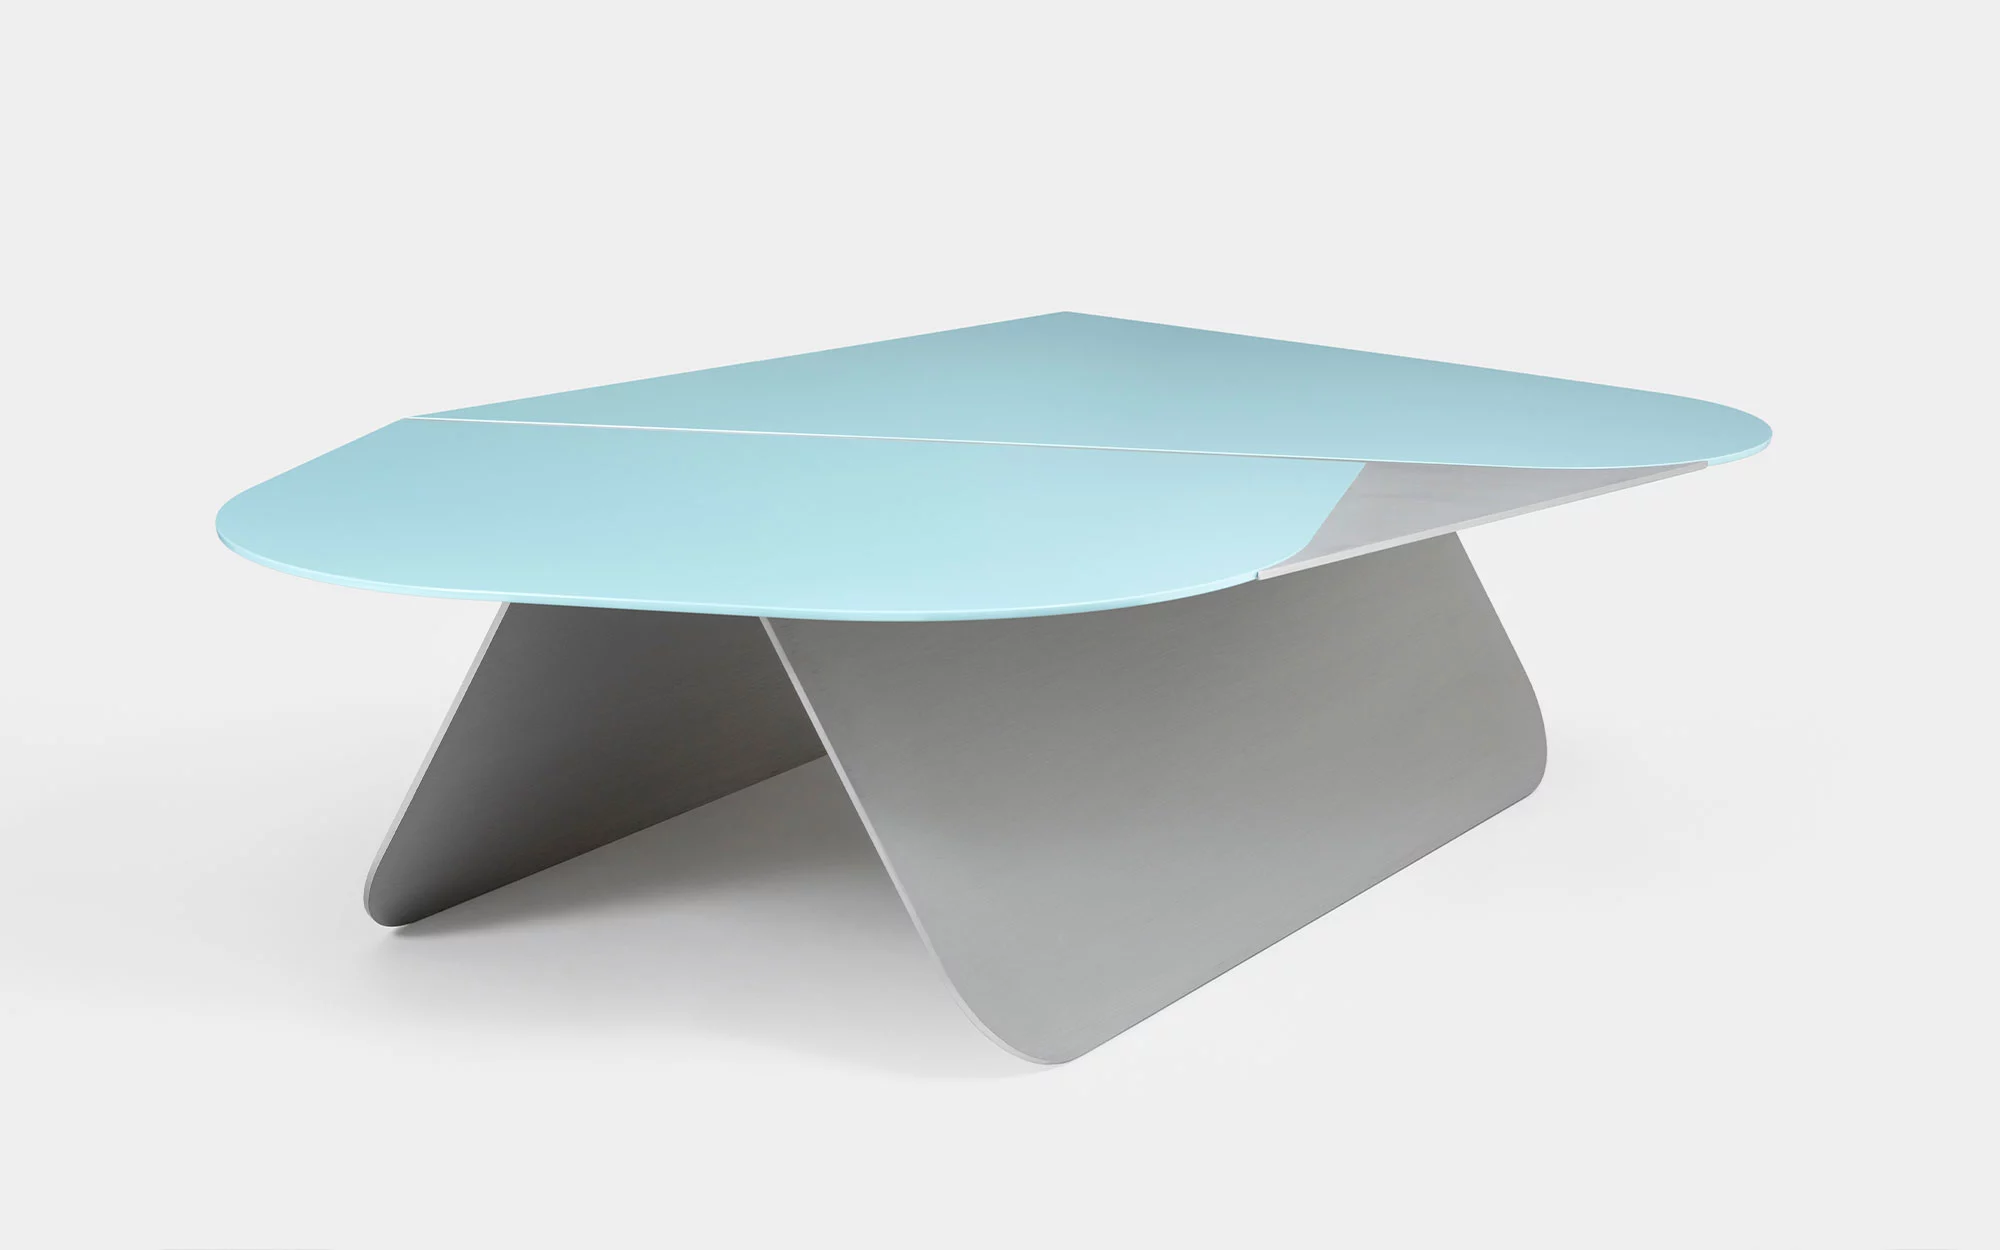 Large DB Coffee Table - Pierre Charpin - Miscellaneous - Galerie kreo